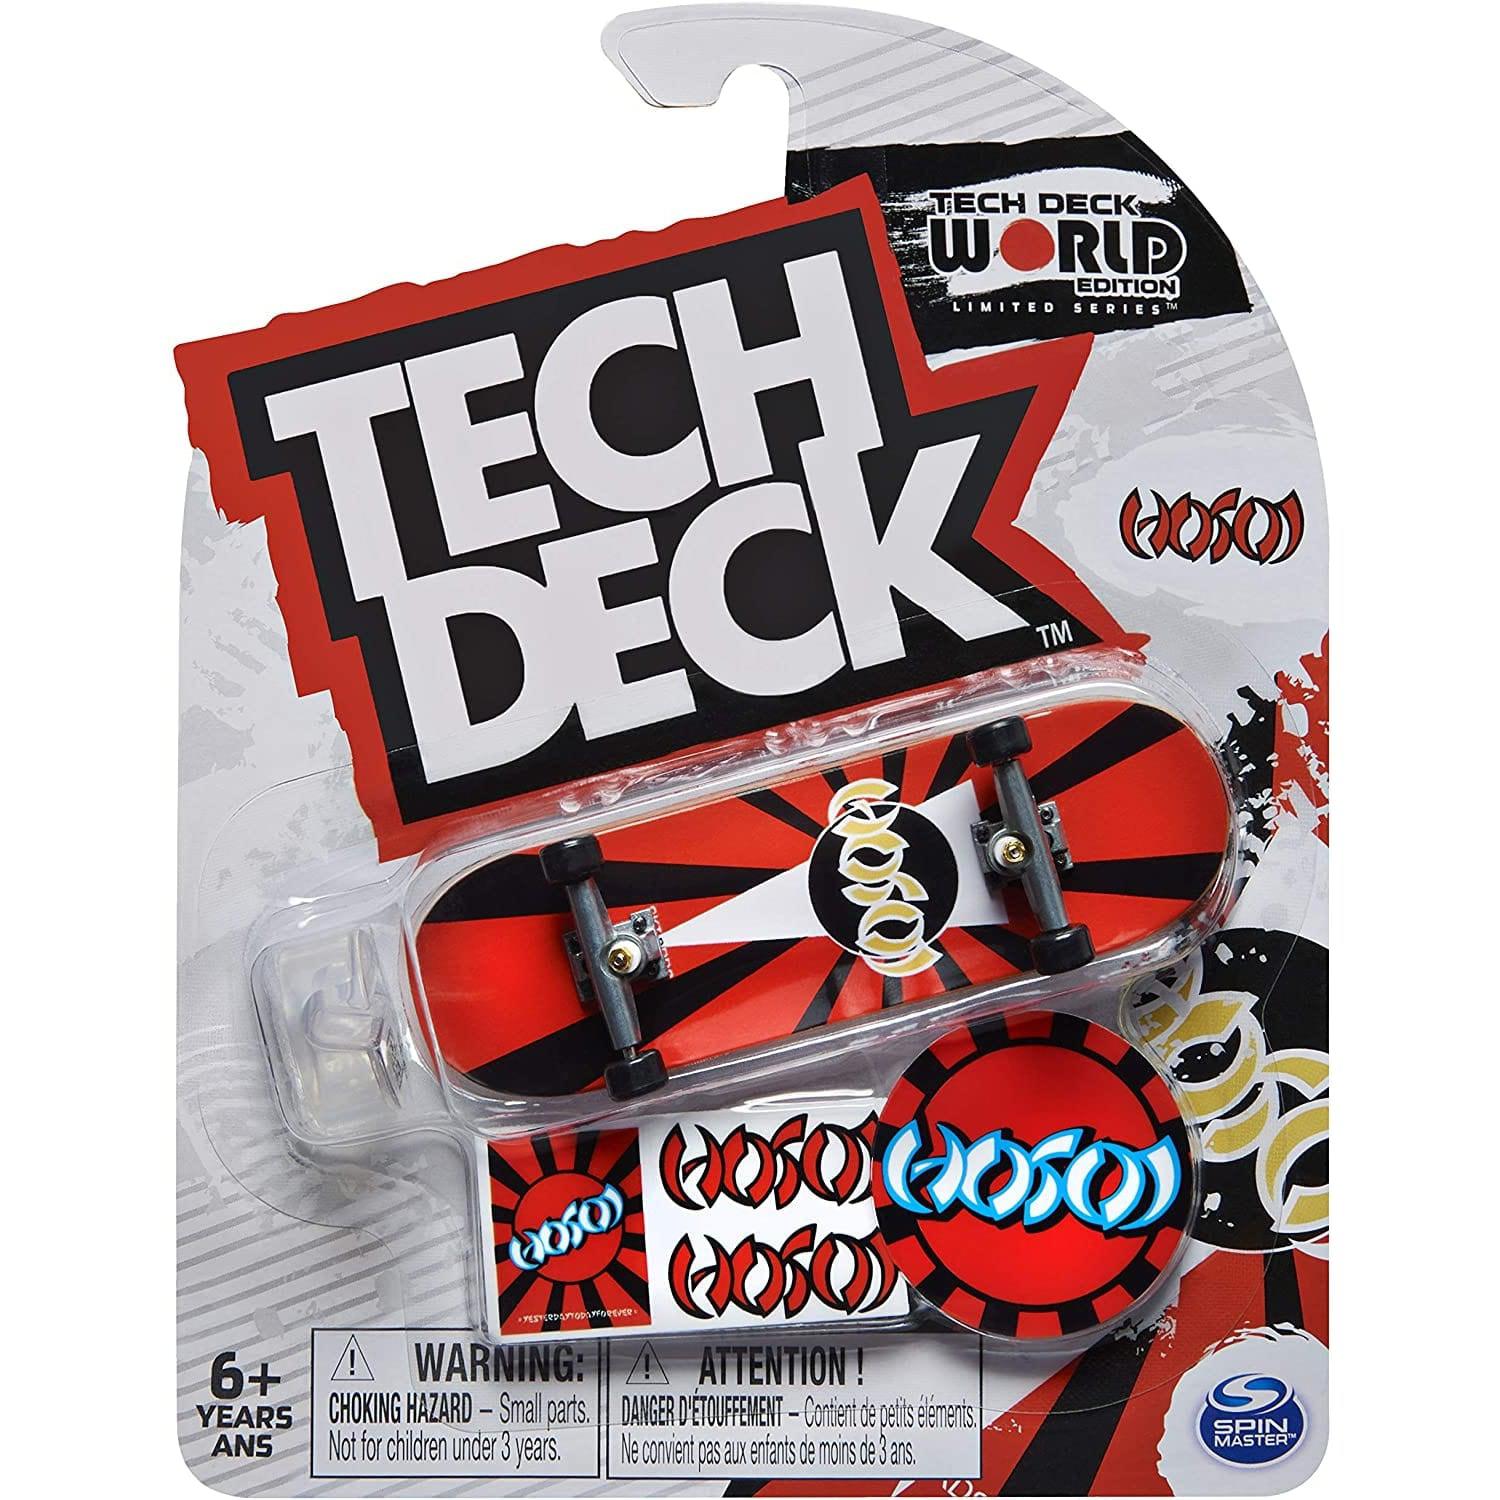 Tech Deck Versus Series Fingerboard 2-Pack and Obstacle Set (styles may  vary)